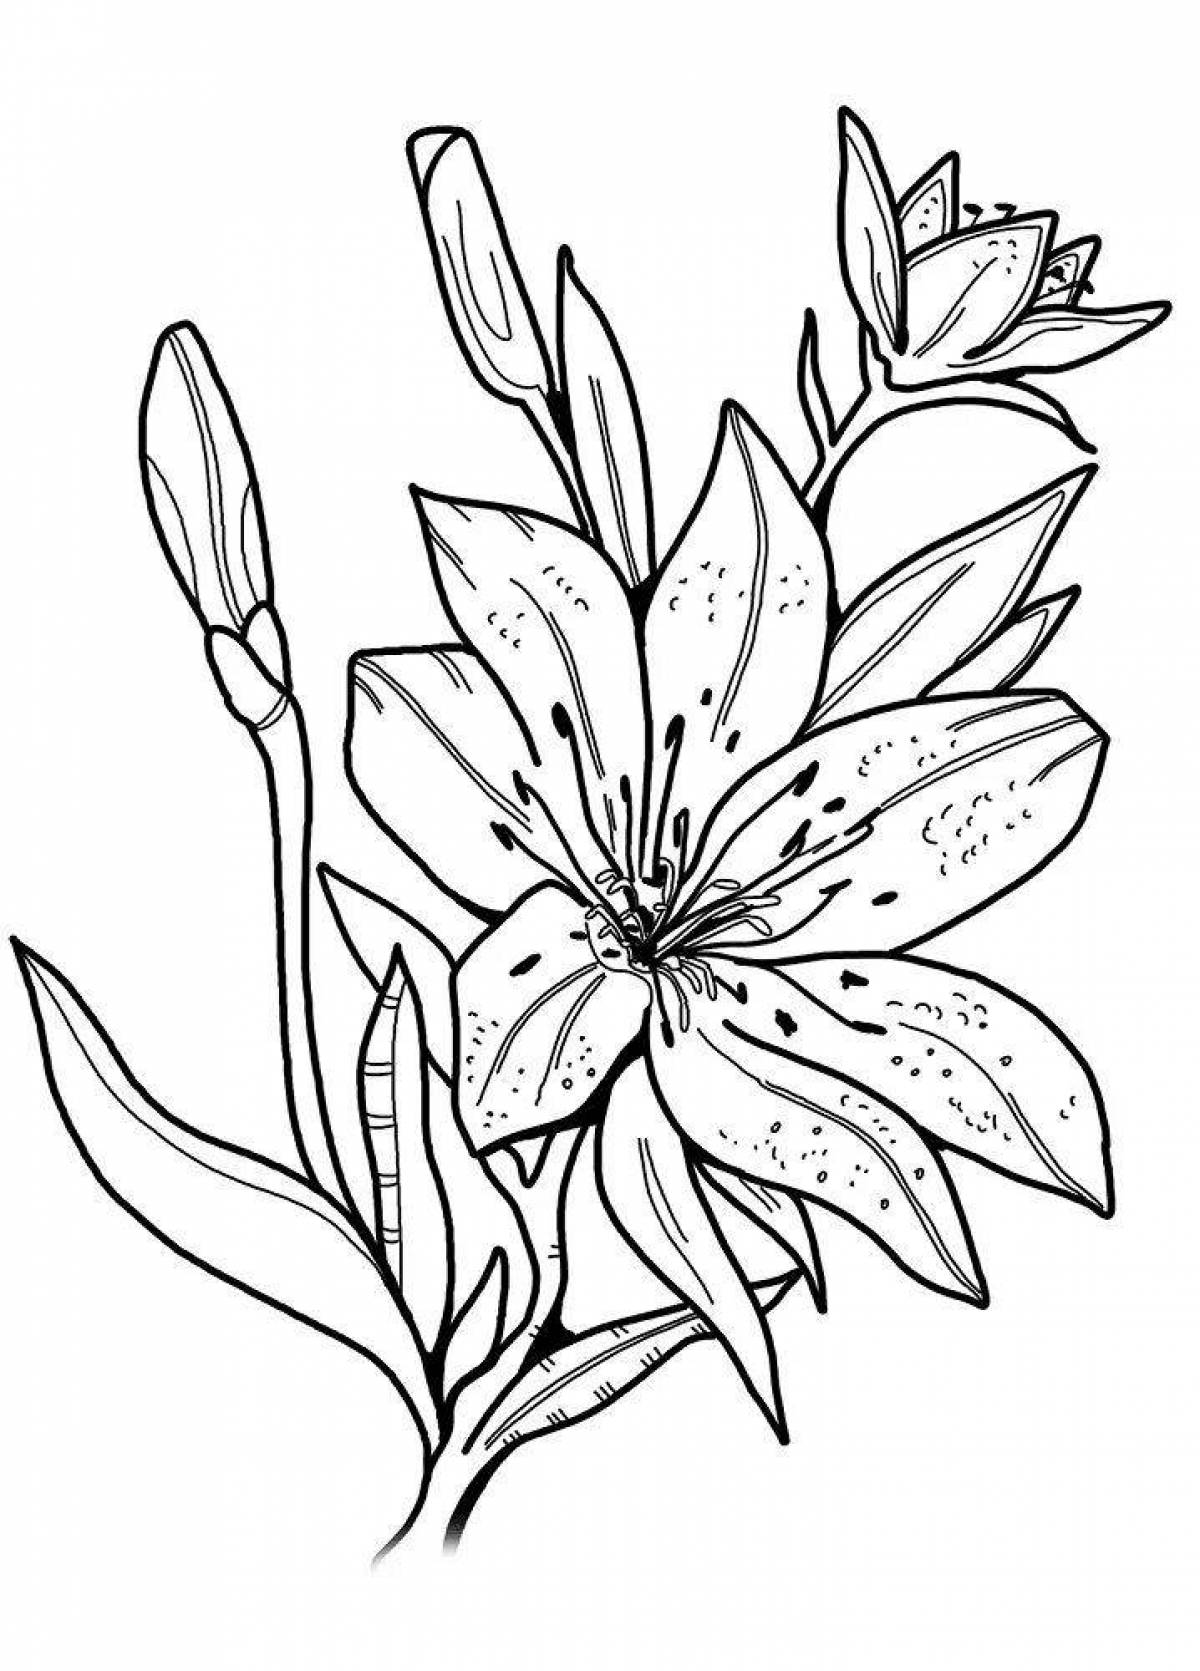 Fancy lily coloring book